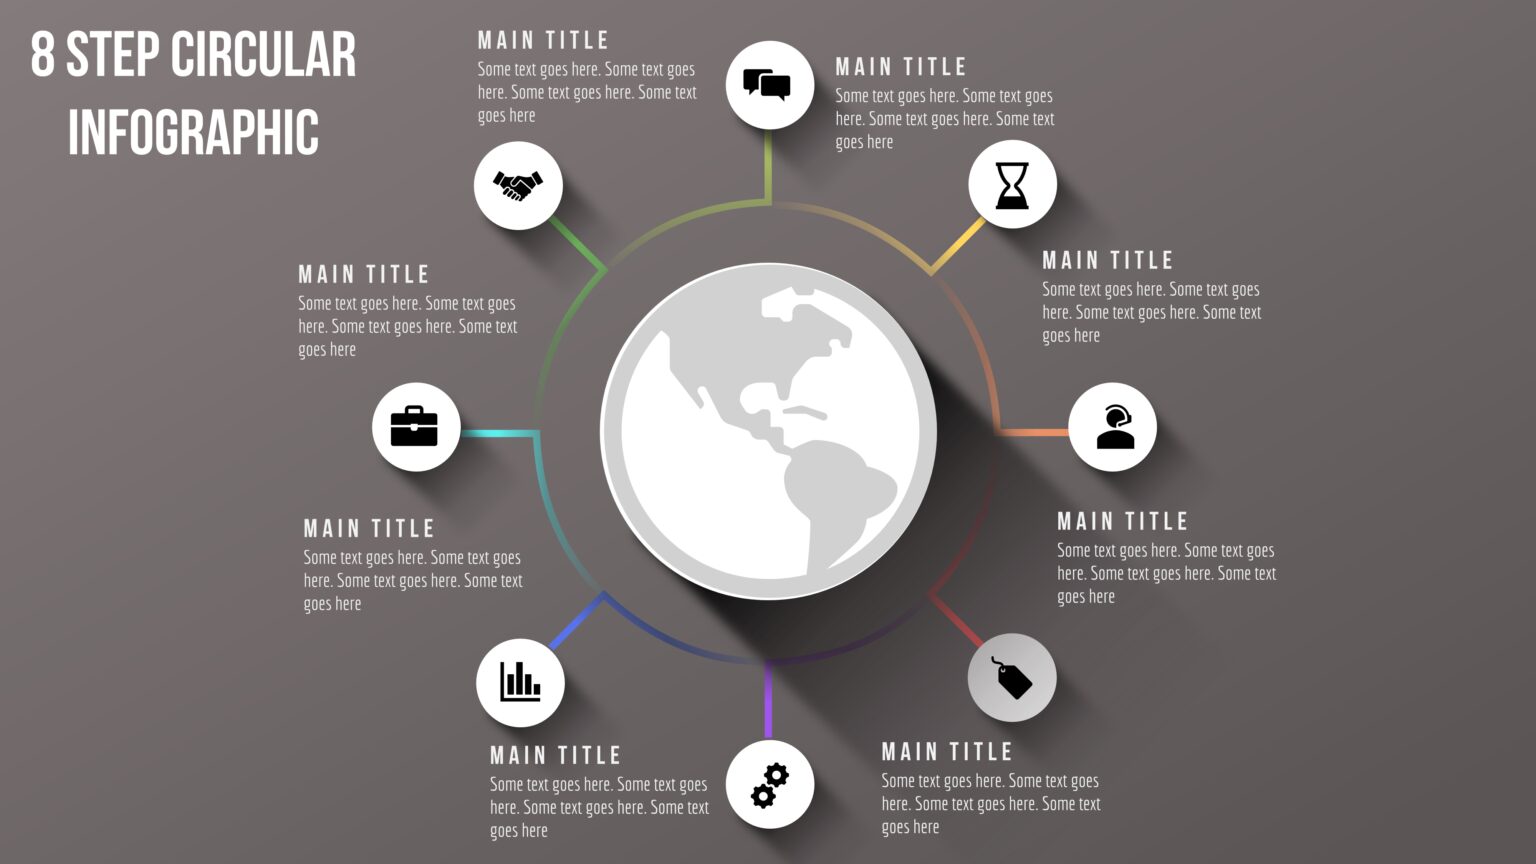 16powerpoint 8 Step Circular Infographic Powerup With Powerpoint 0698